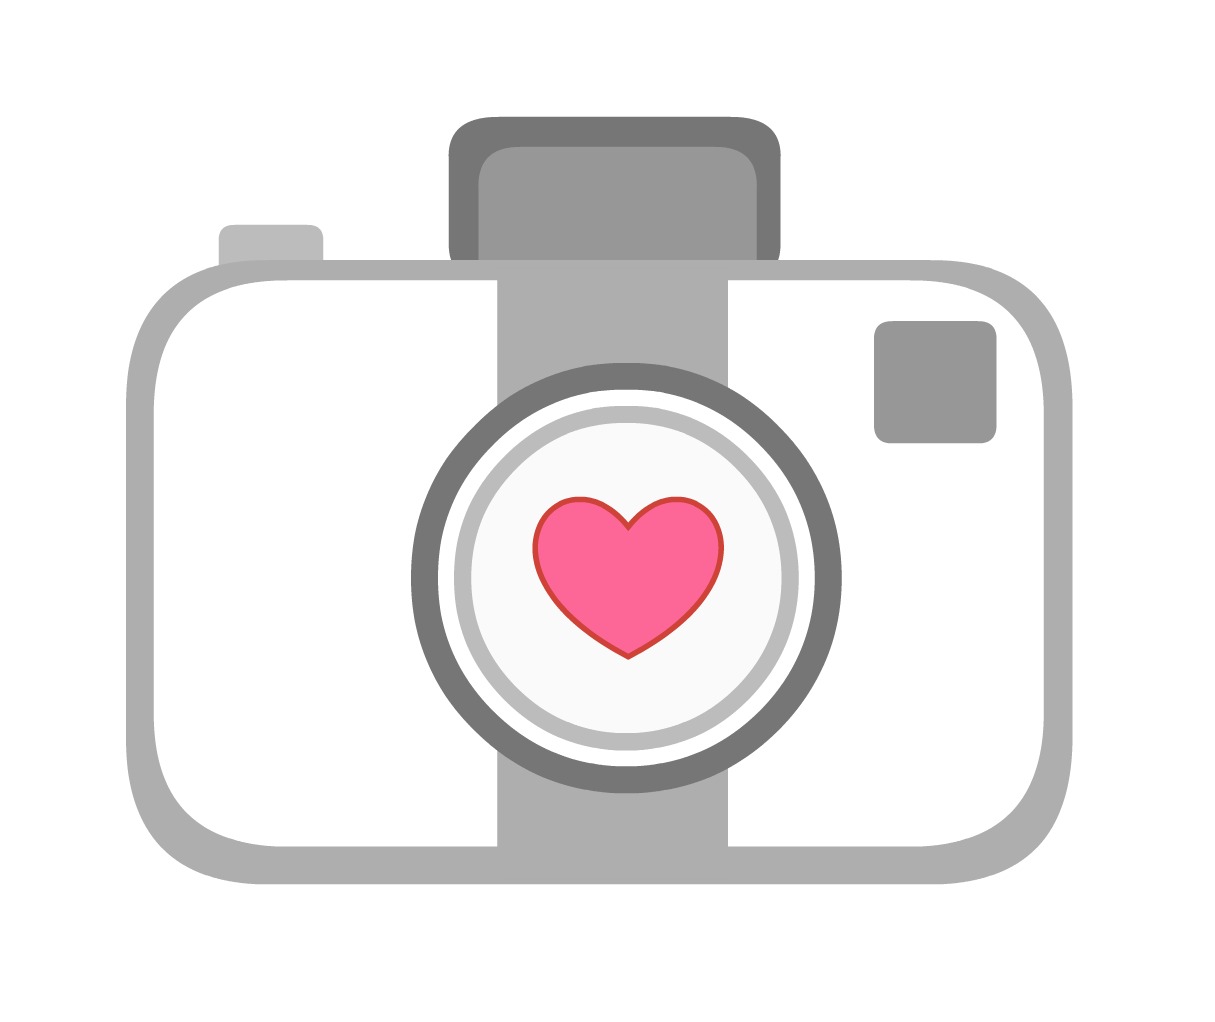 Photography Clip Art - Images, Illustrations, Photos